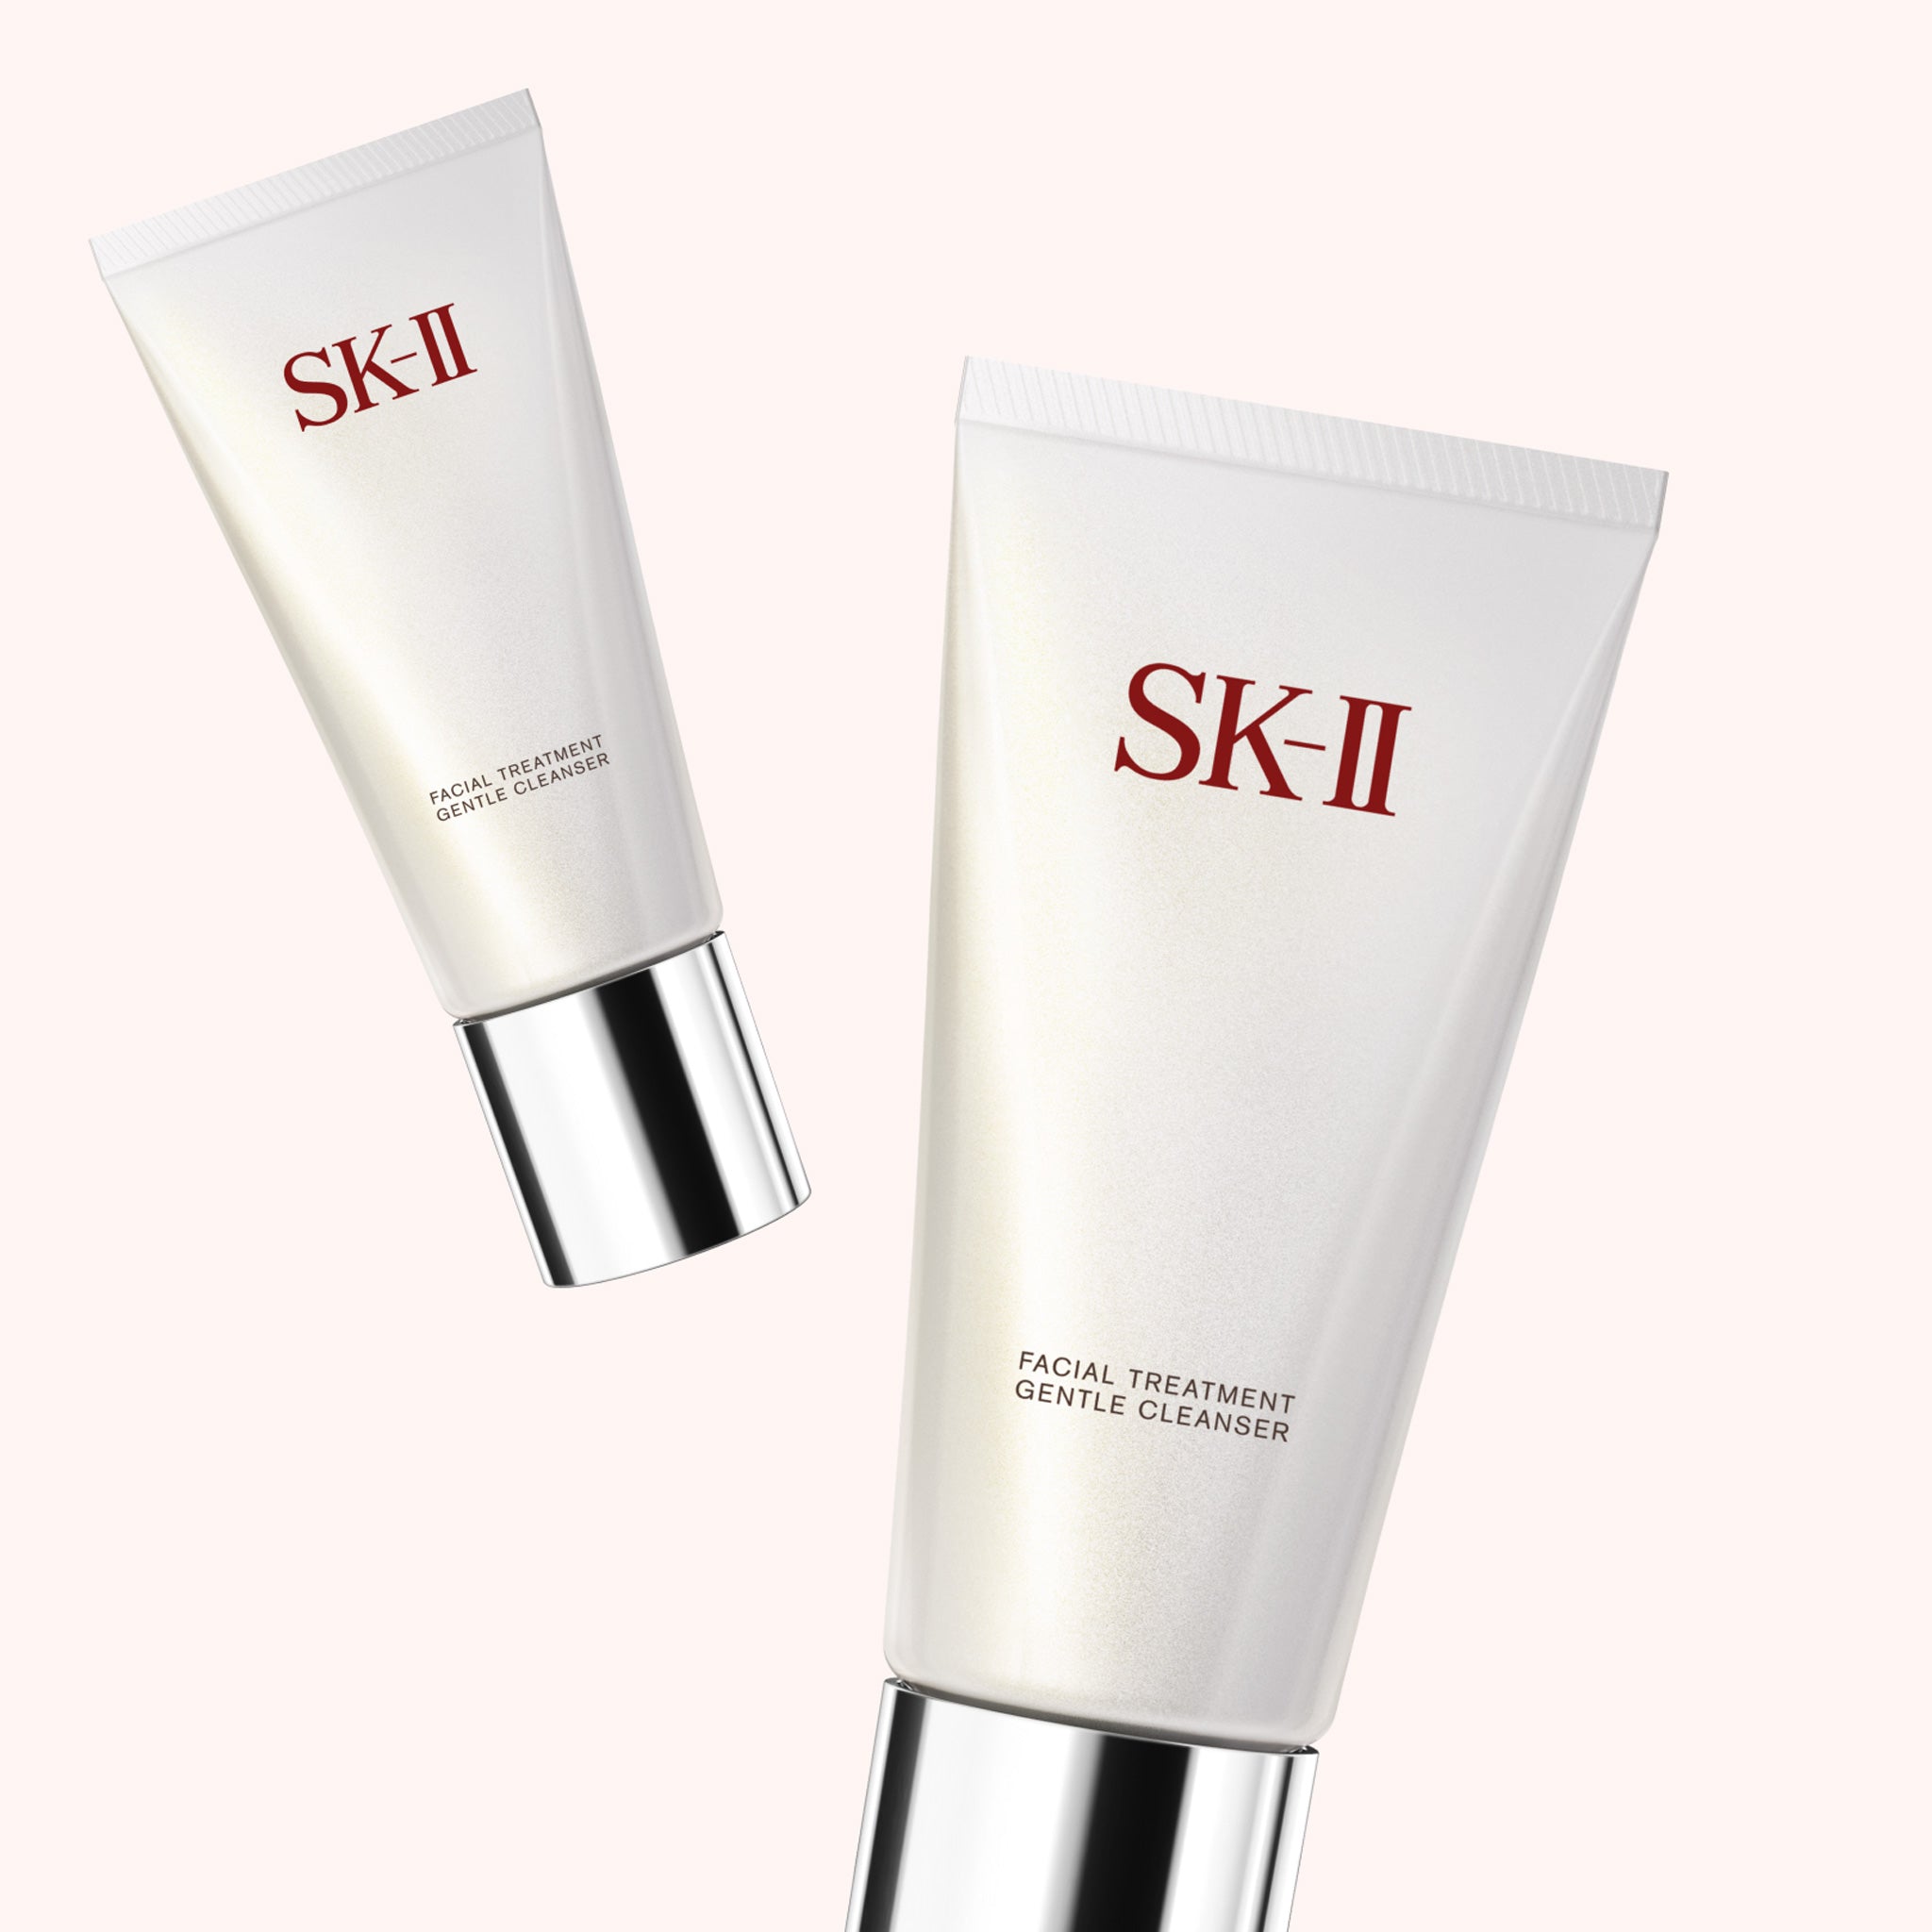 SK-II Facial Treatment Cleanser Daily Foaming Wash 120g